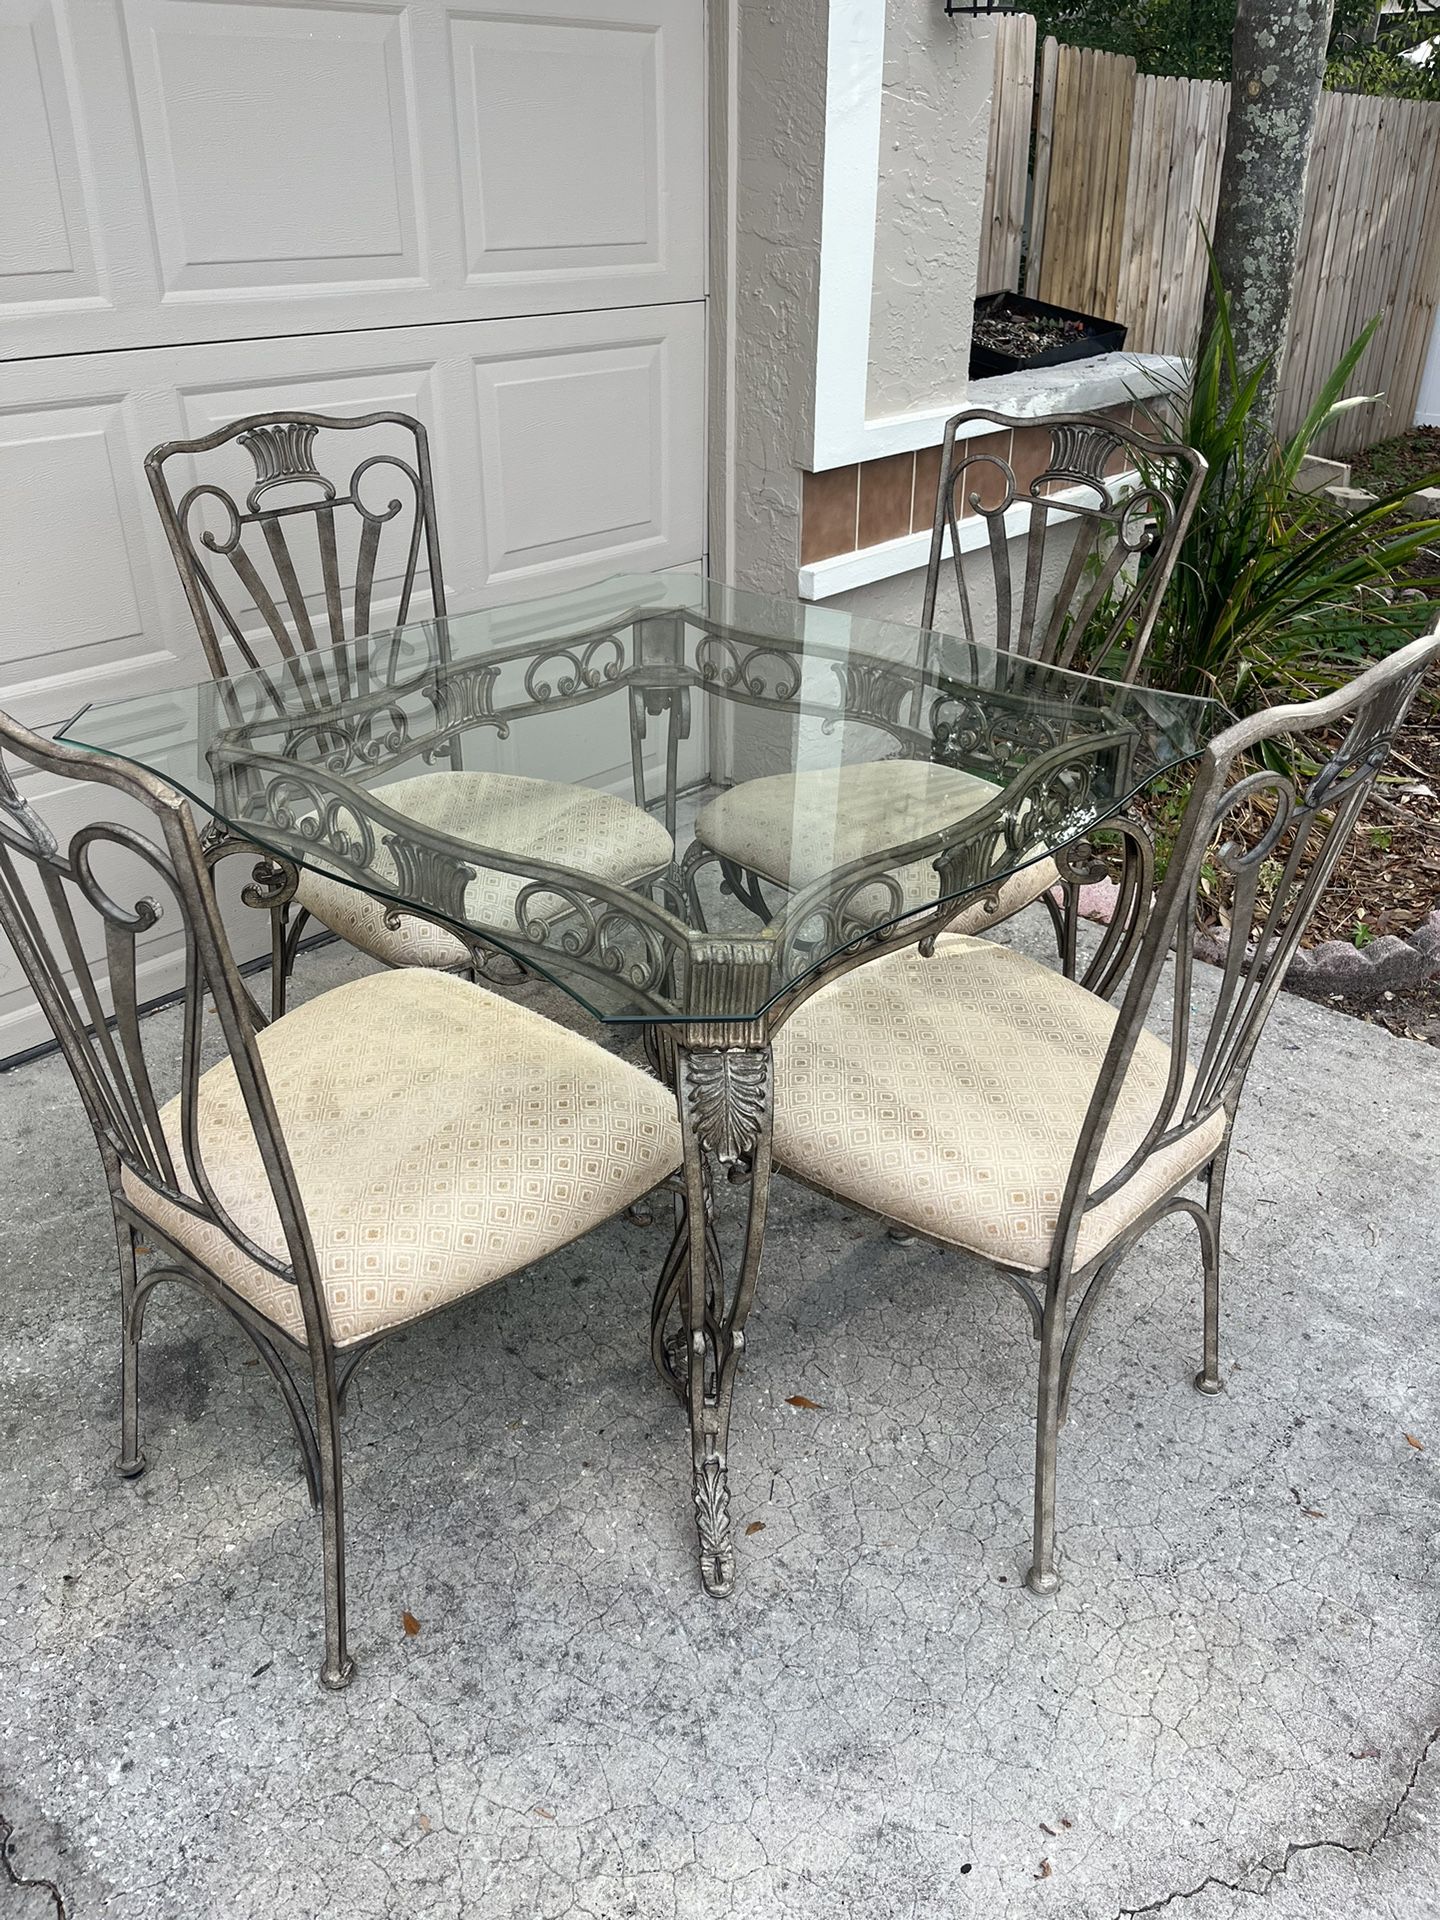 BEAUTIFUL GLASS DINING TABLE WITH IRON BASE